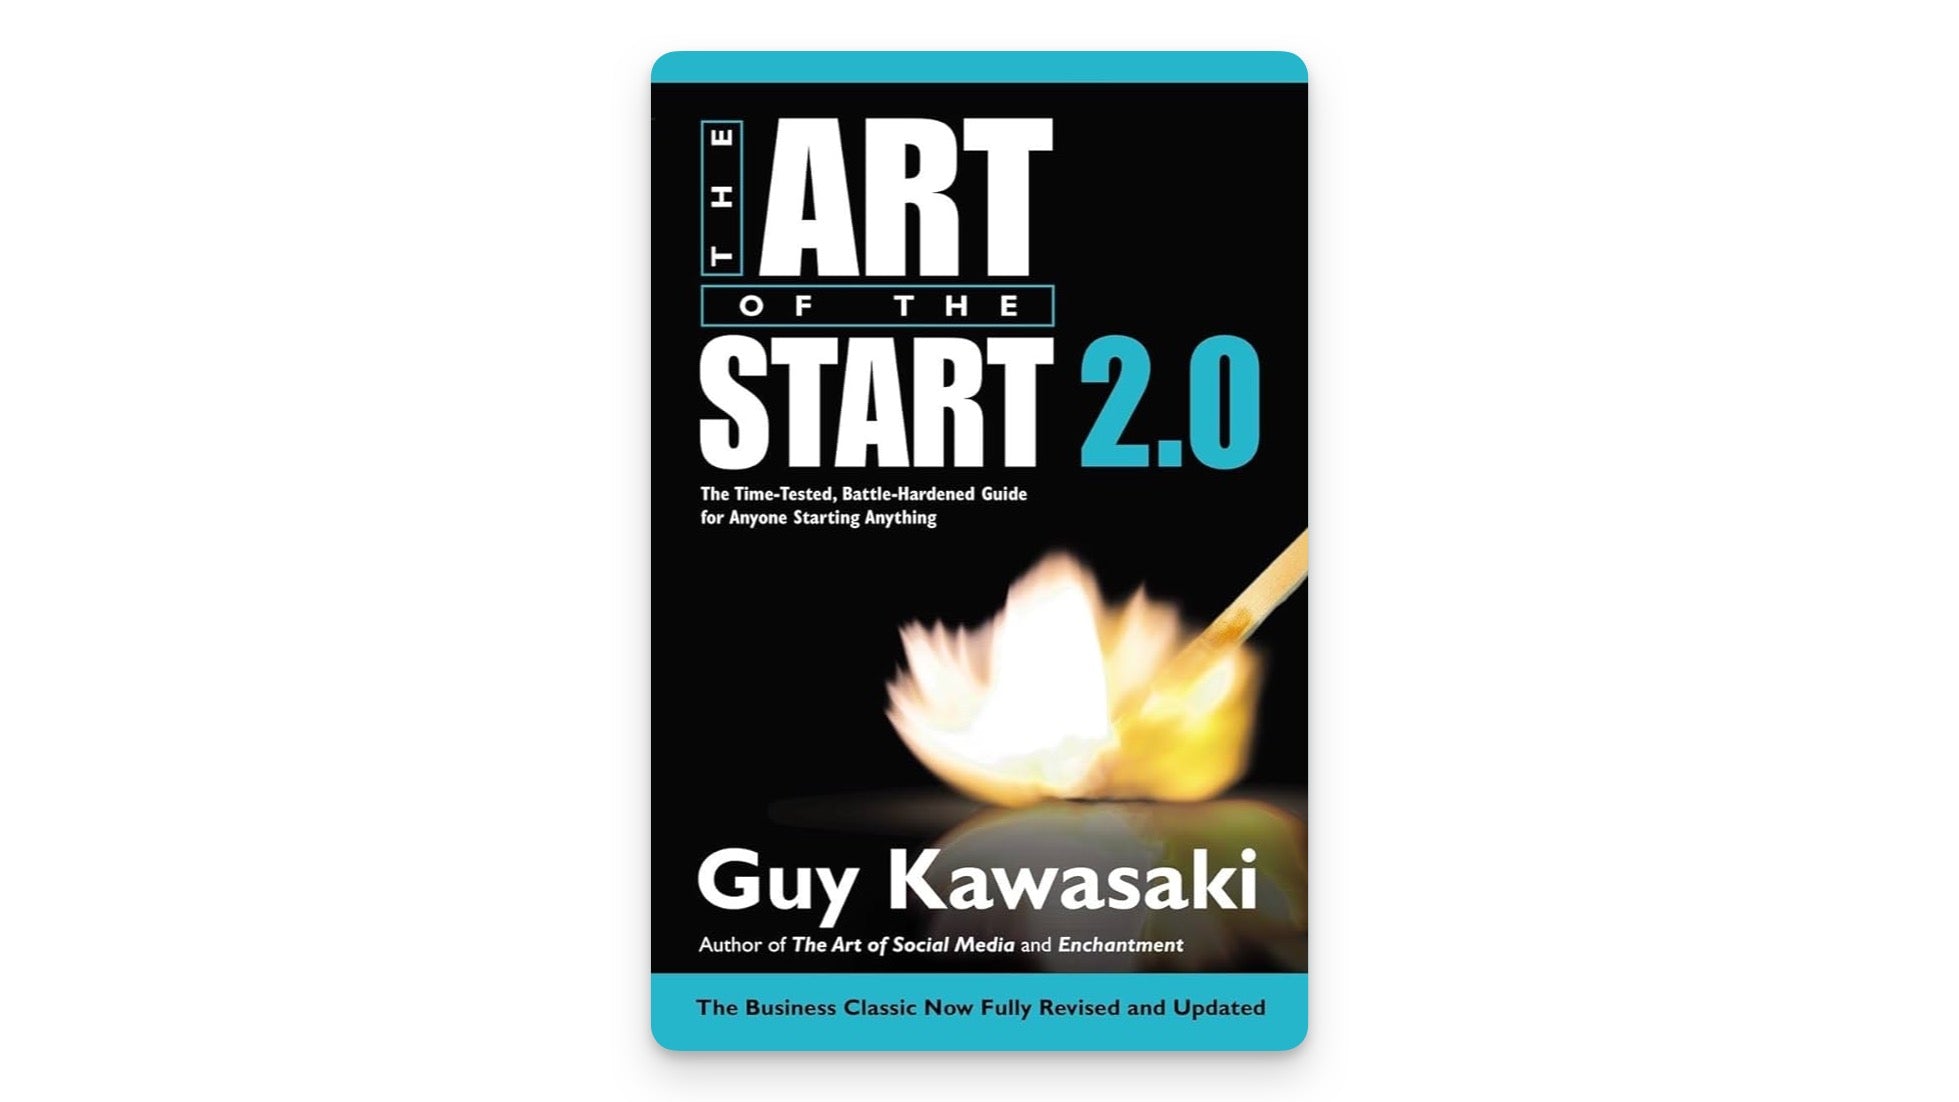 The art of the start book cover showing a match being lit